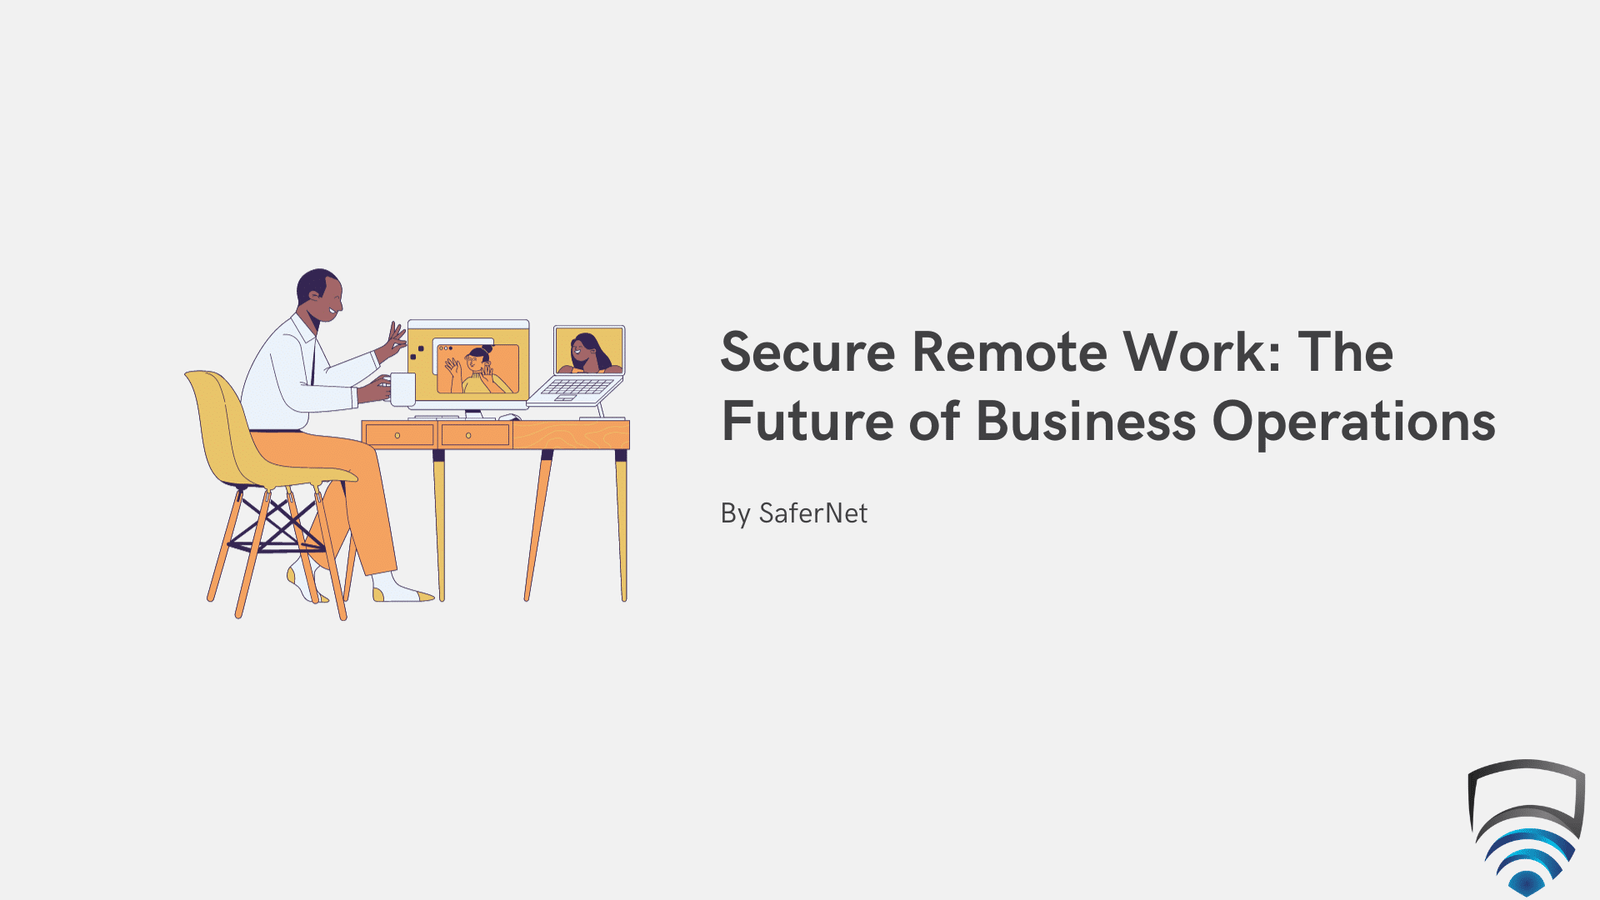 Secure Remote Work: The Future of Business Operations